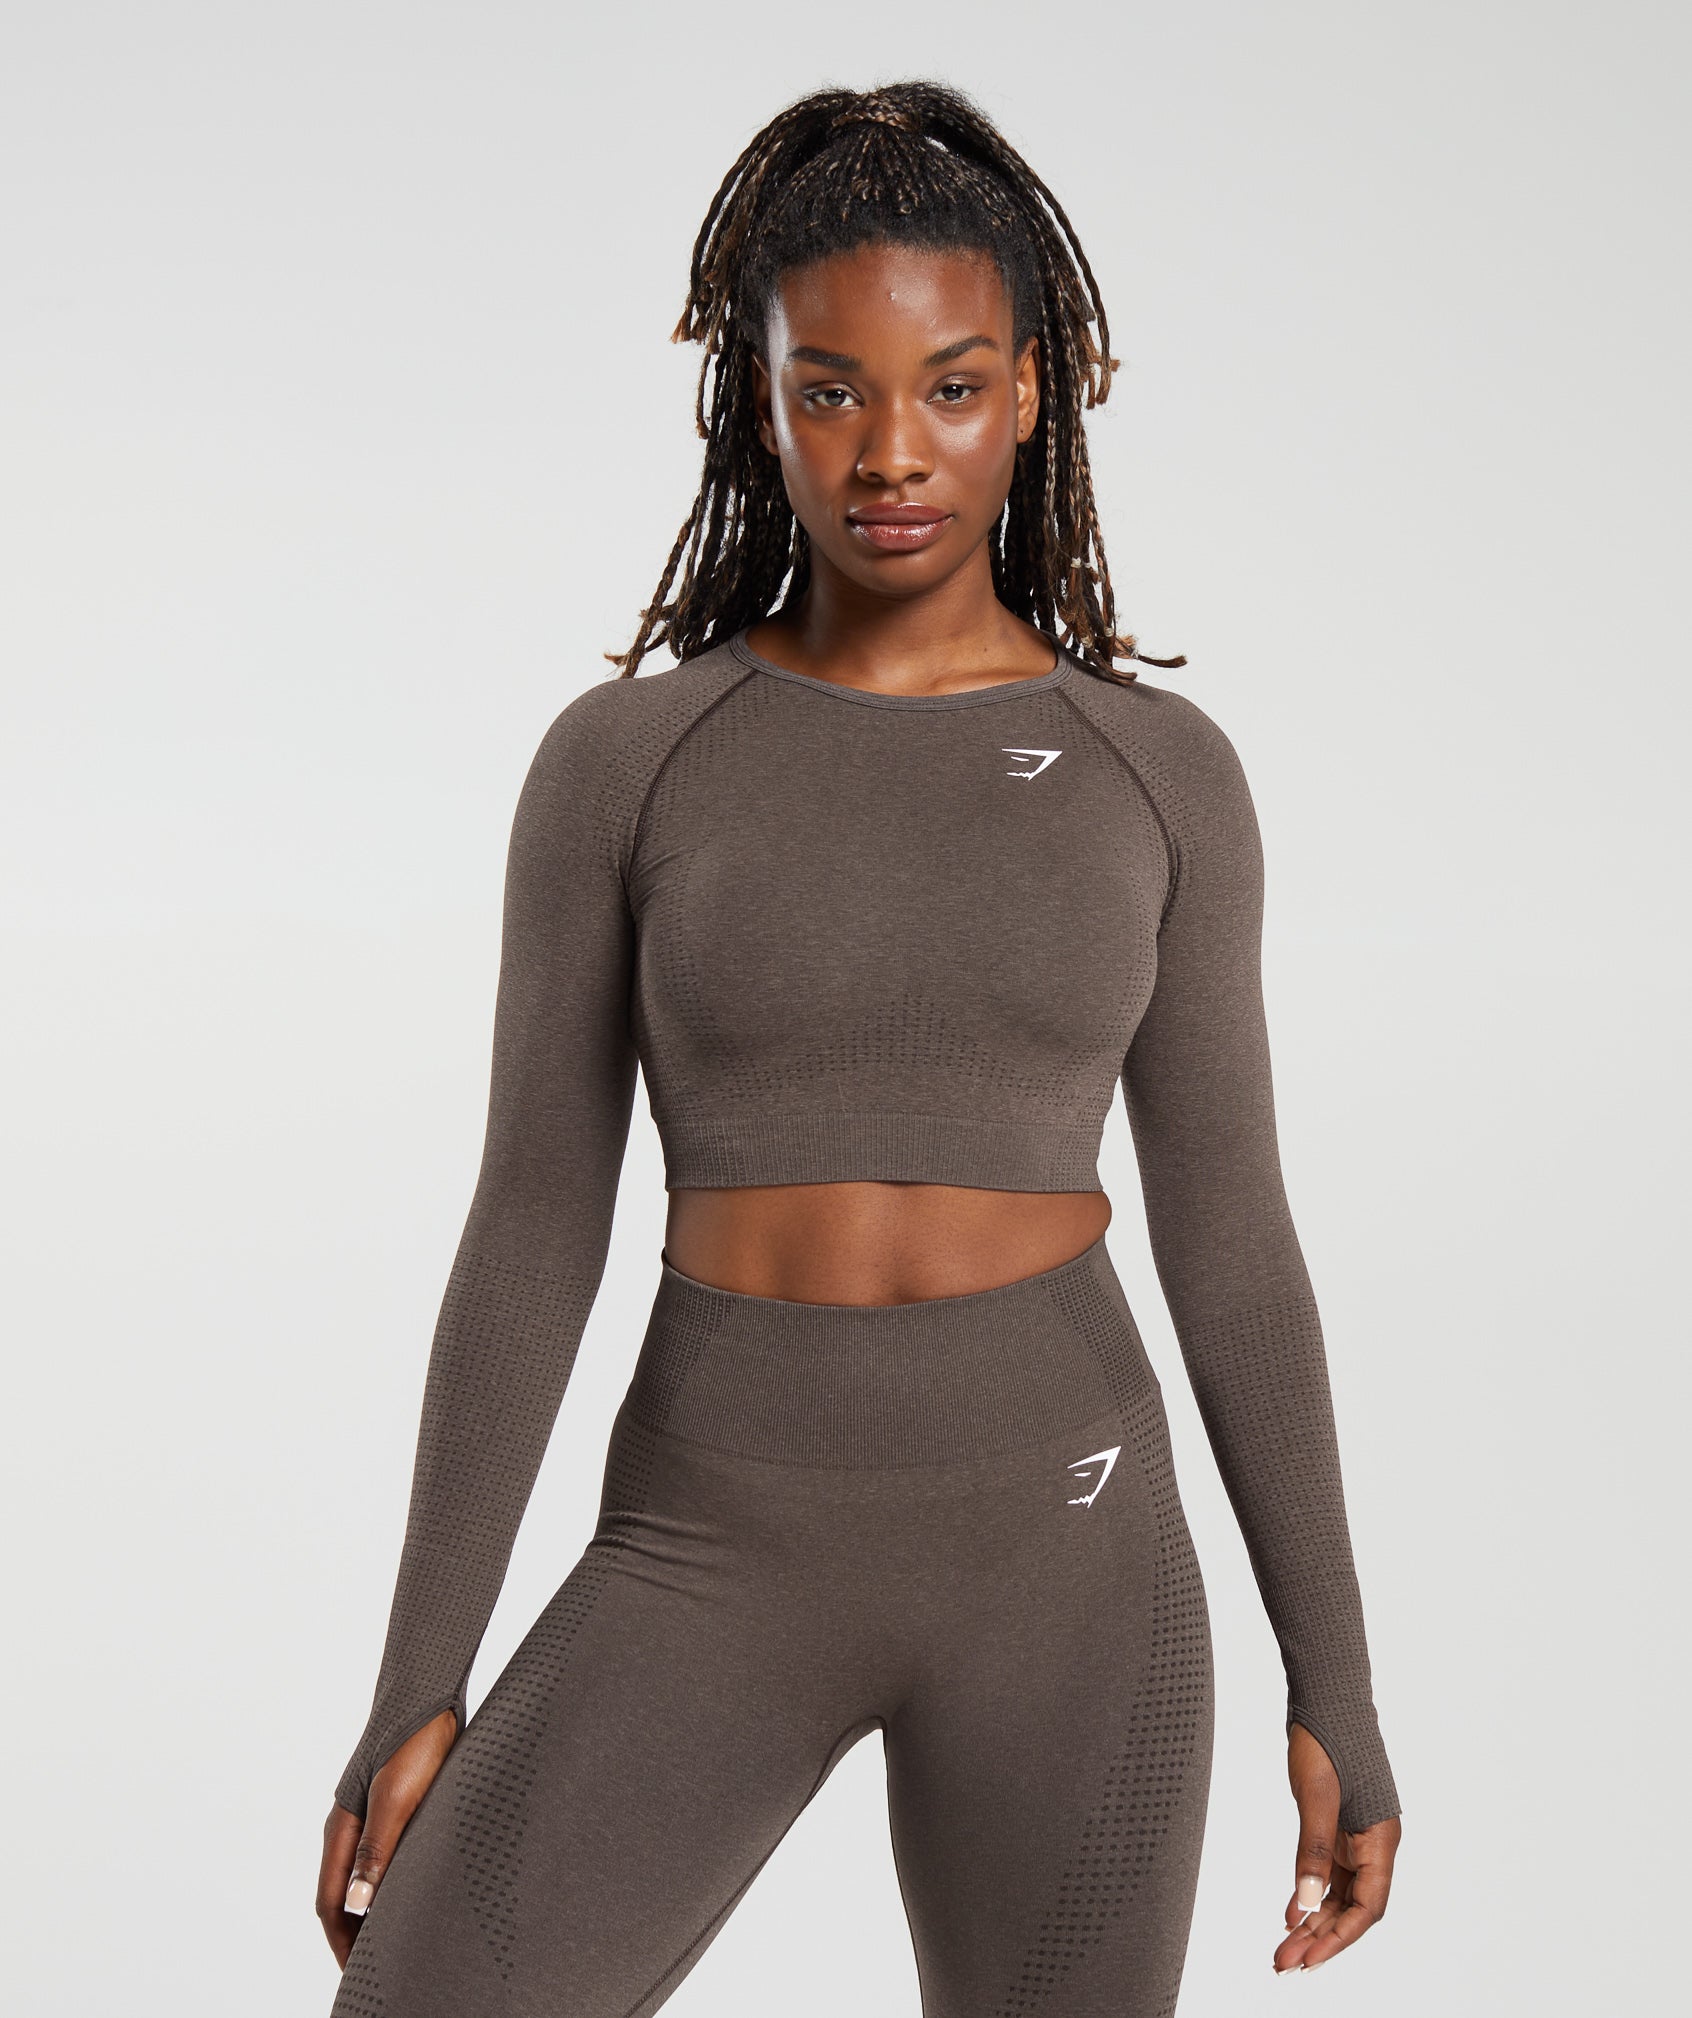 Long Sleeved Tops for Women, Workout Tops